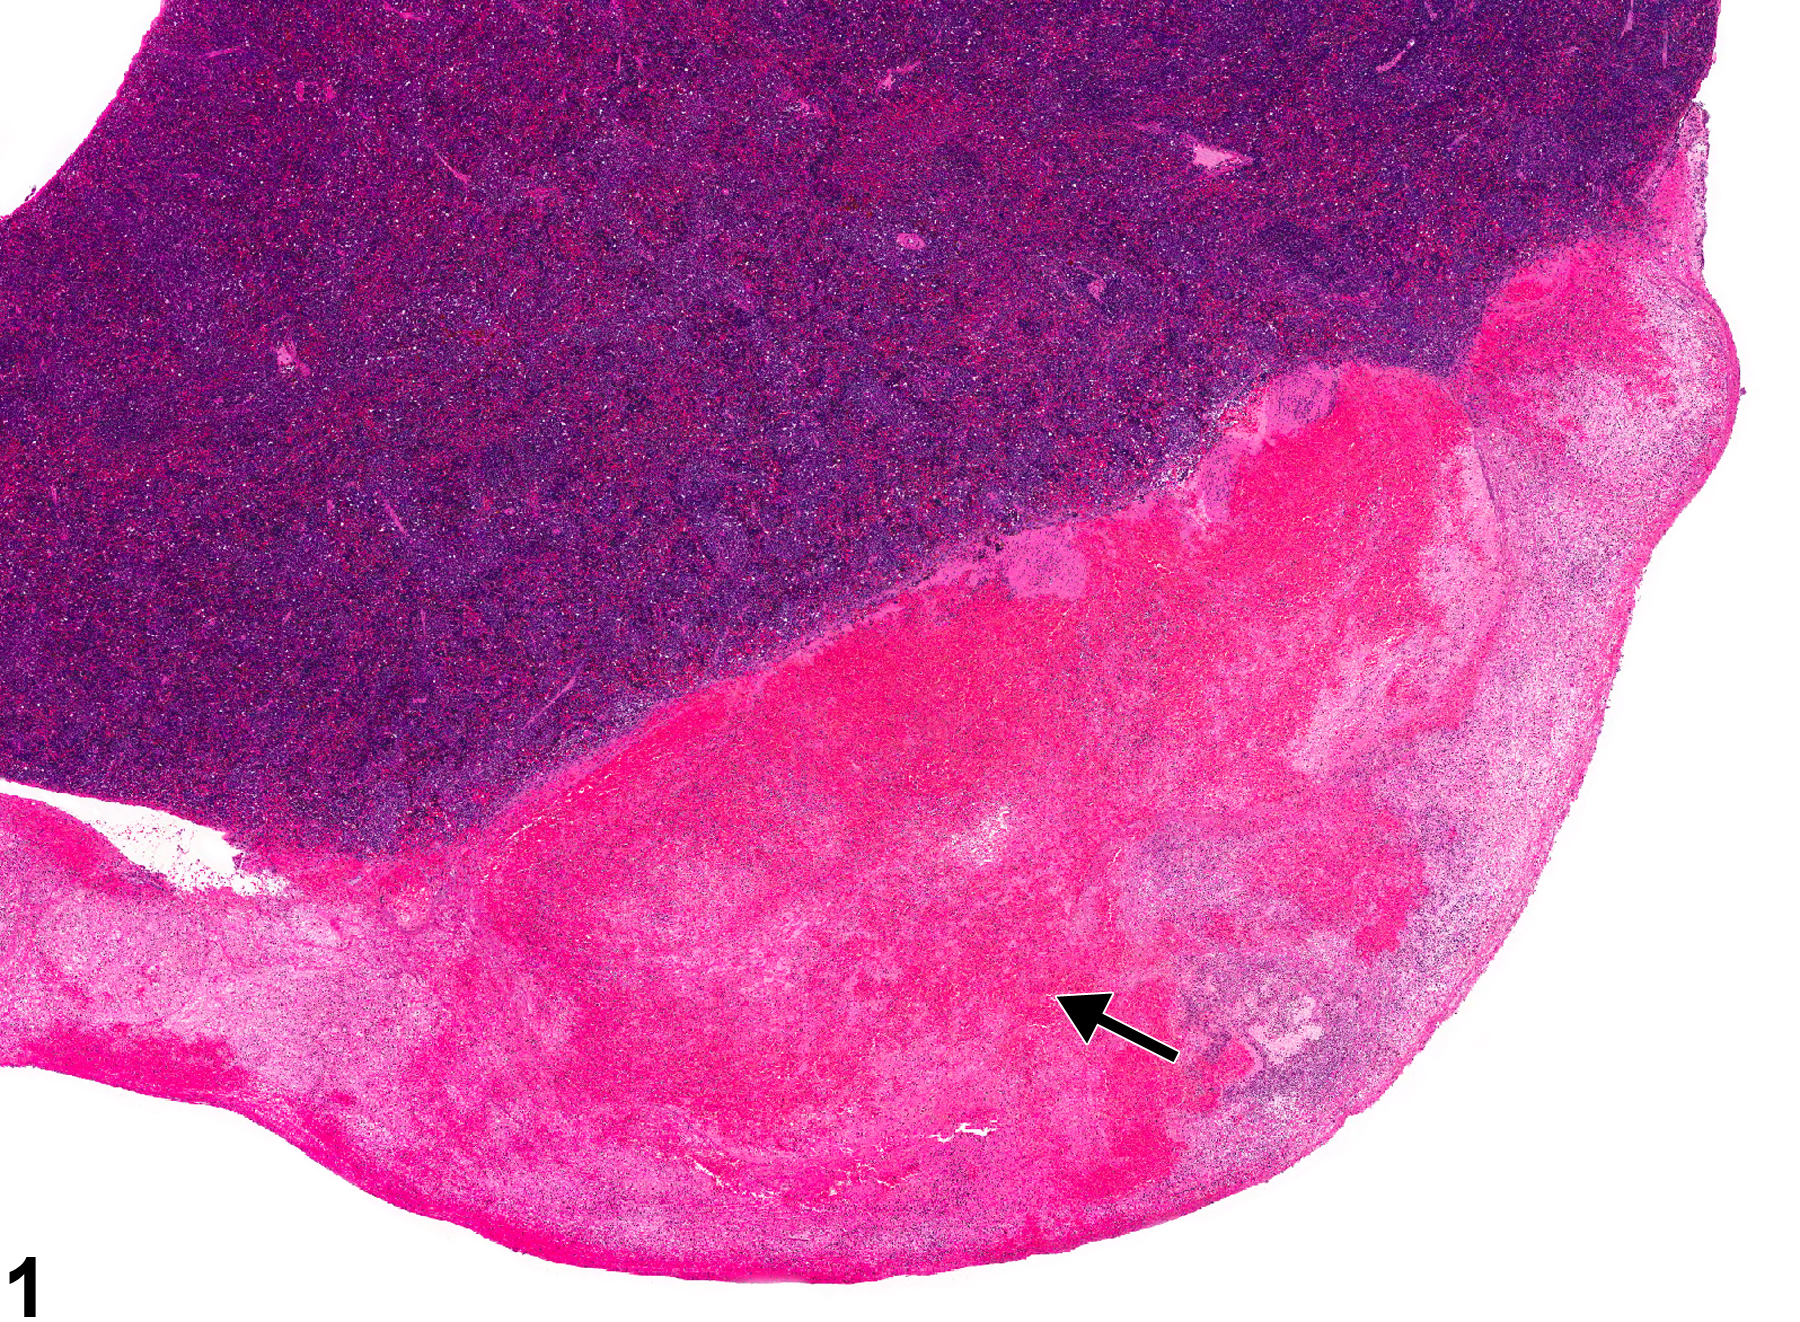 Image of hemorrhage in the spleen from a female Harlan Sprague-Dawley rat in a chronic study